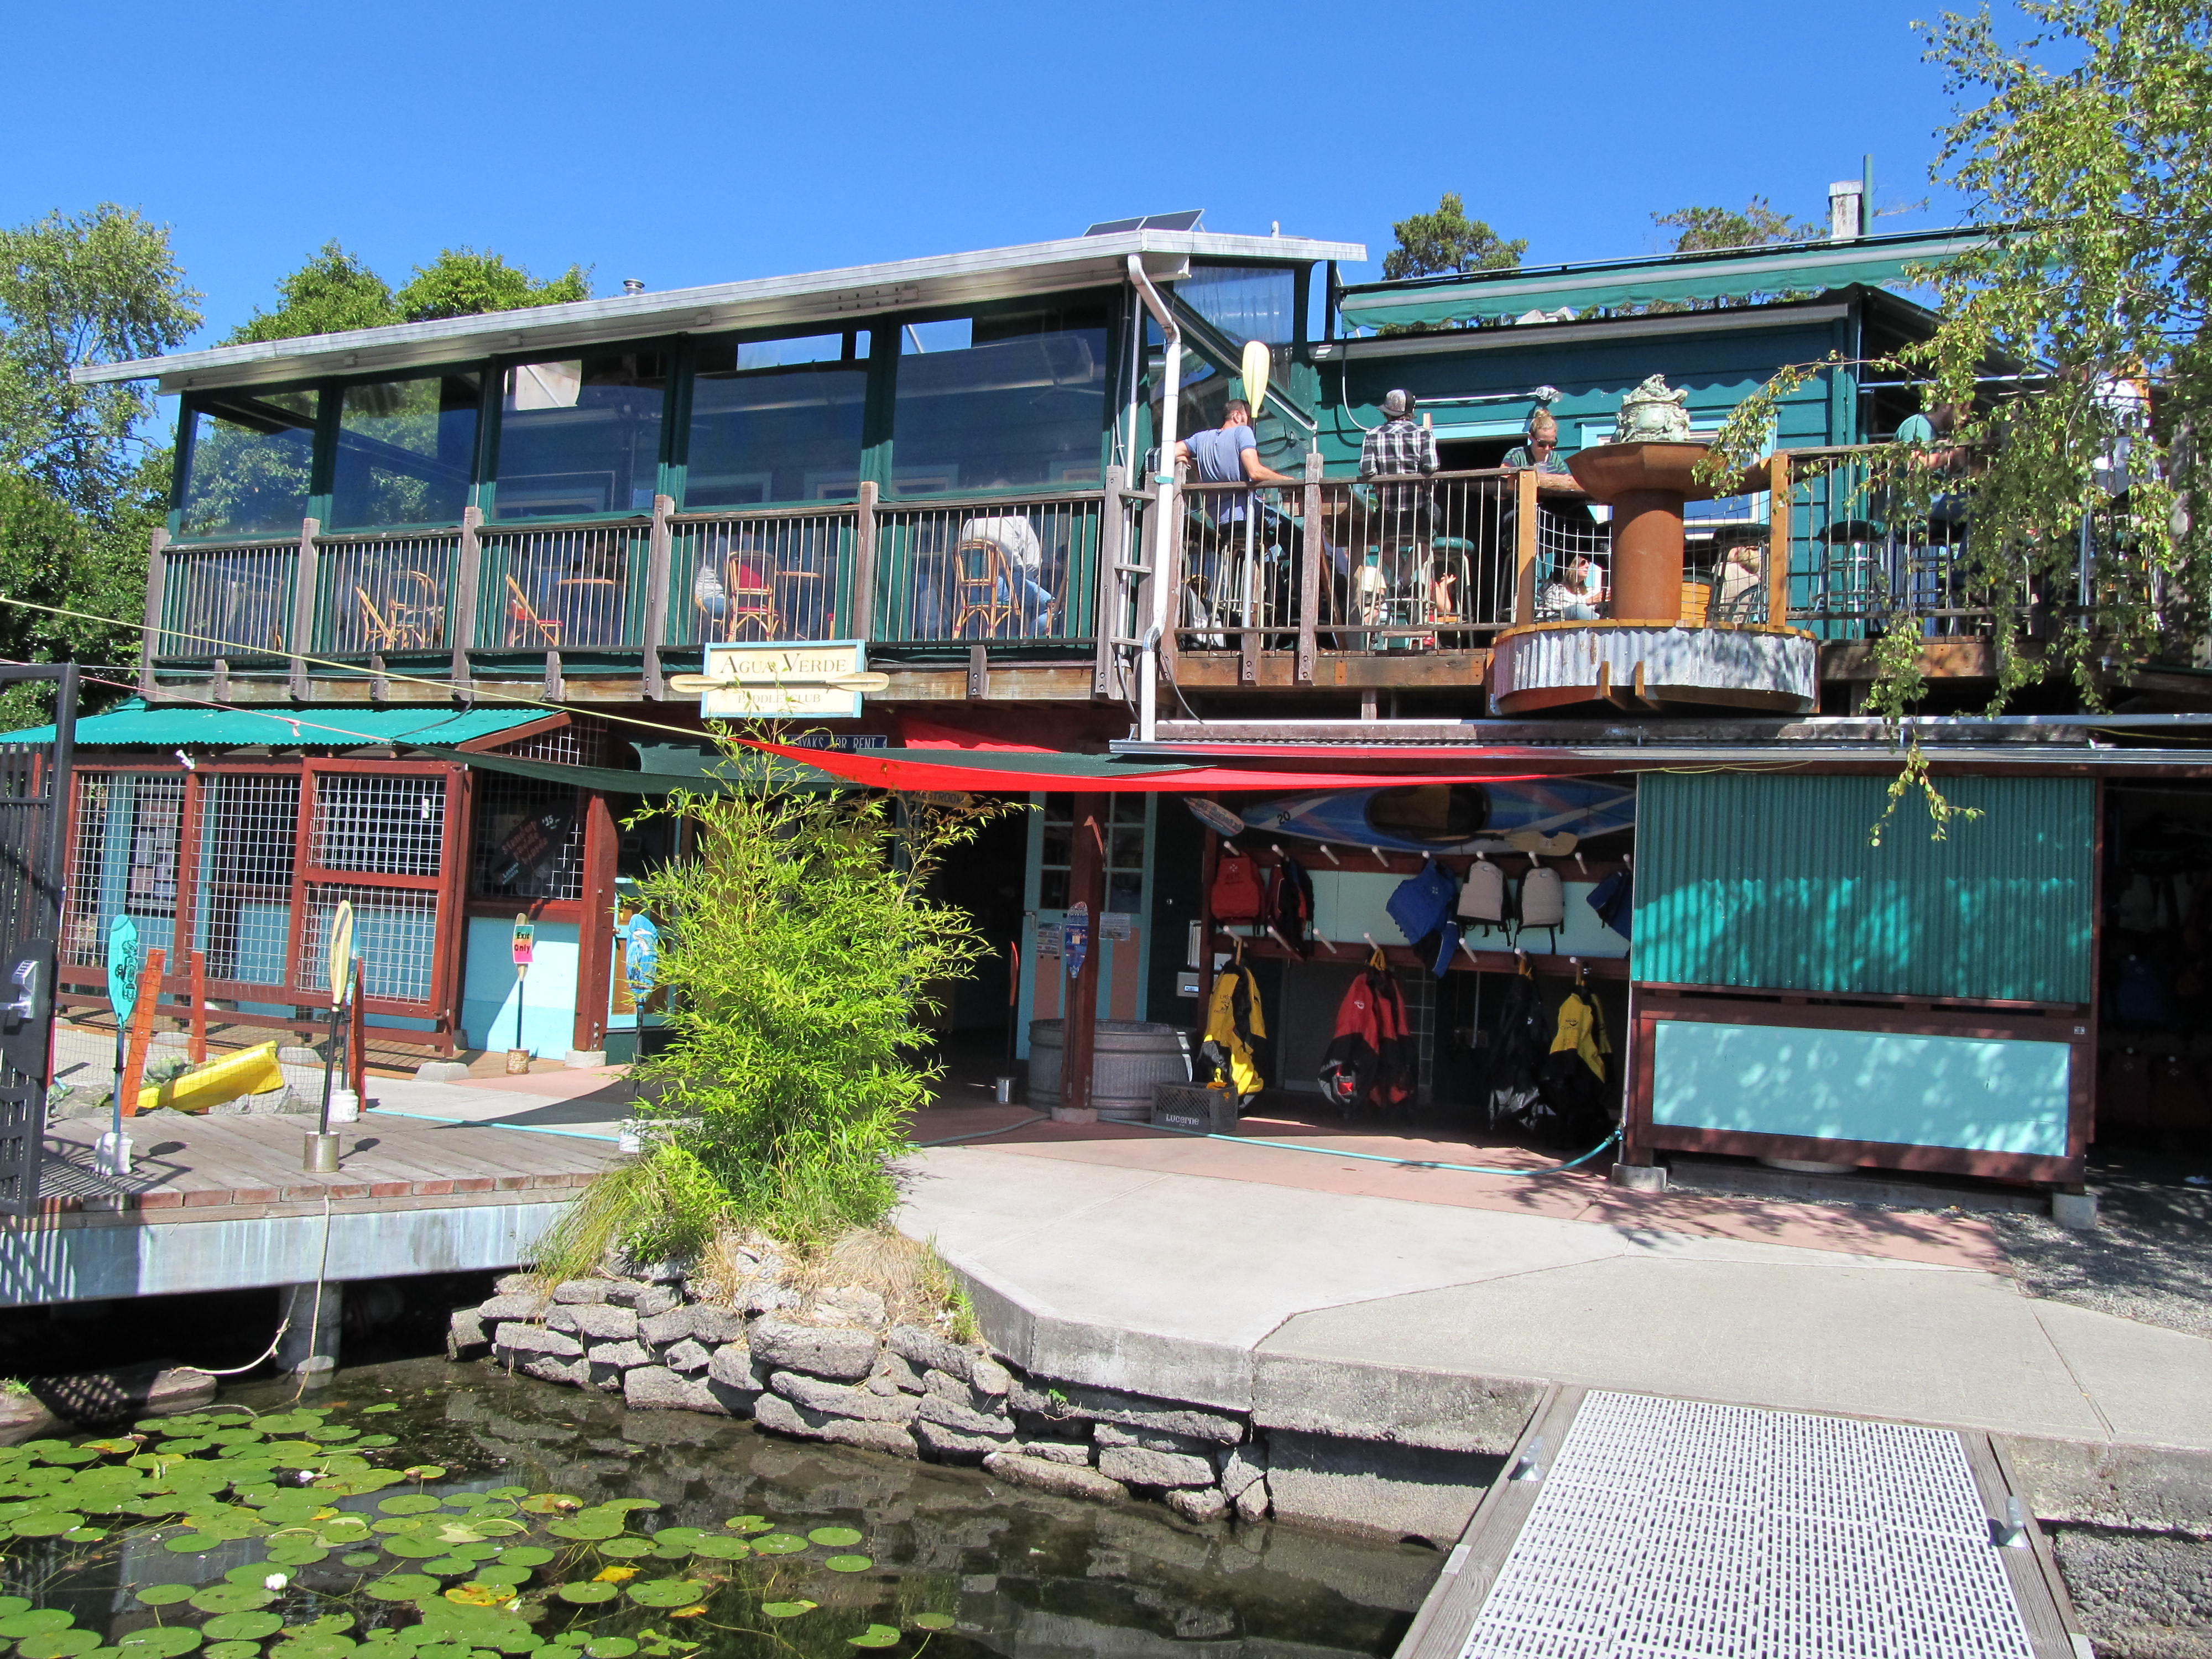 Agua Verde Paddling Club and Cafe